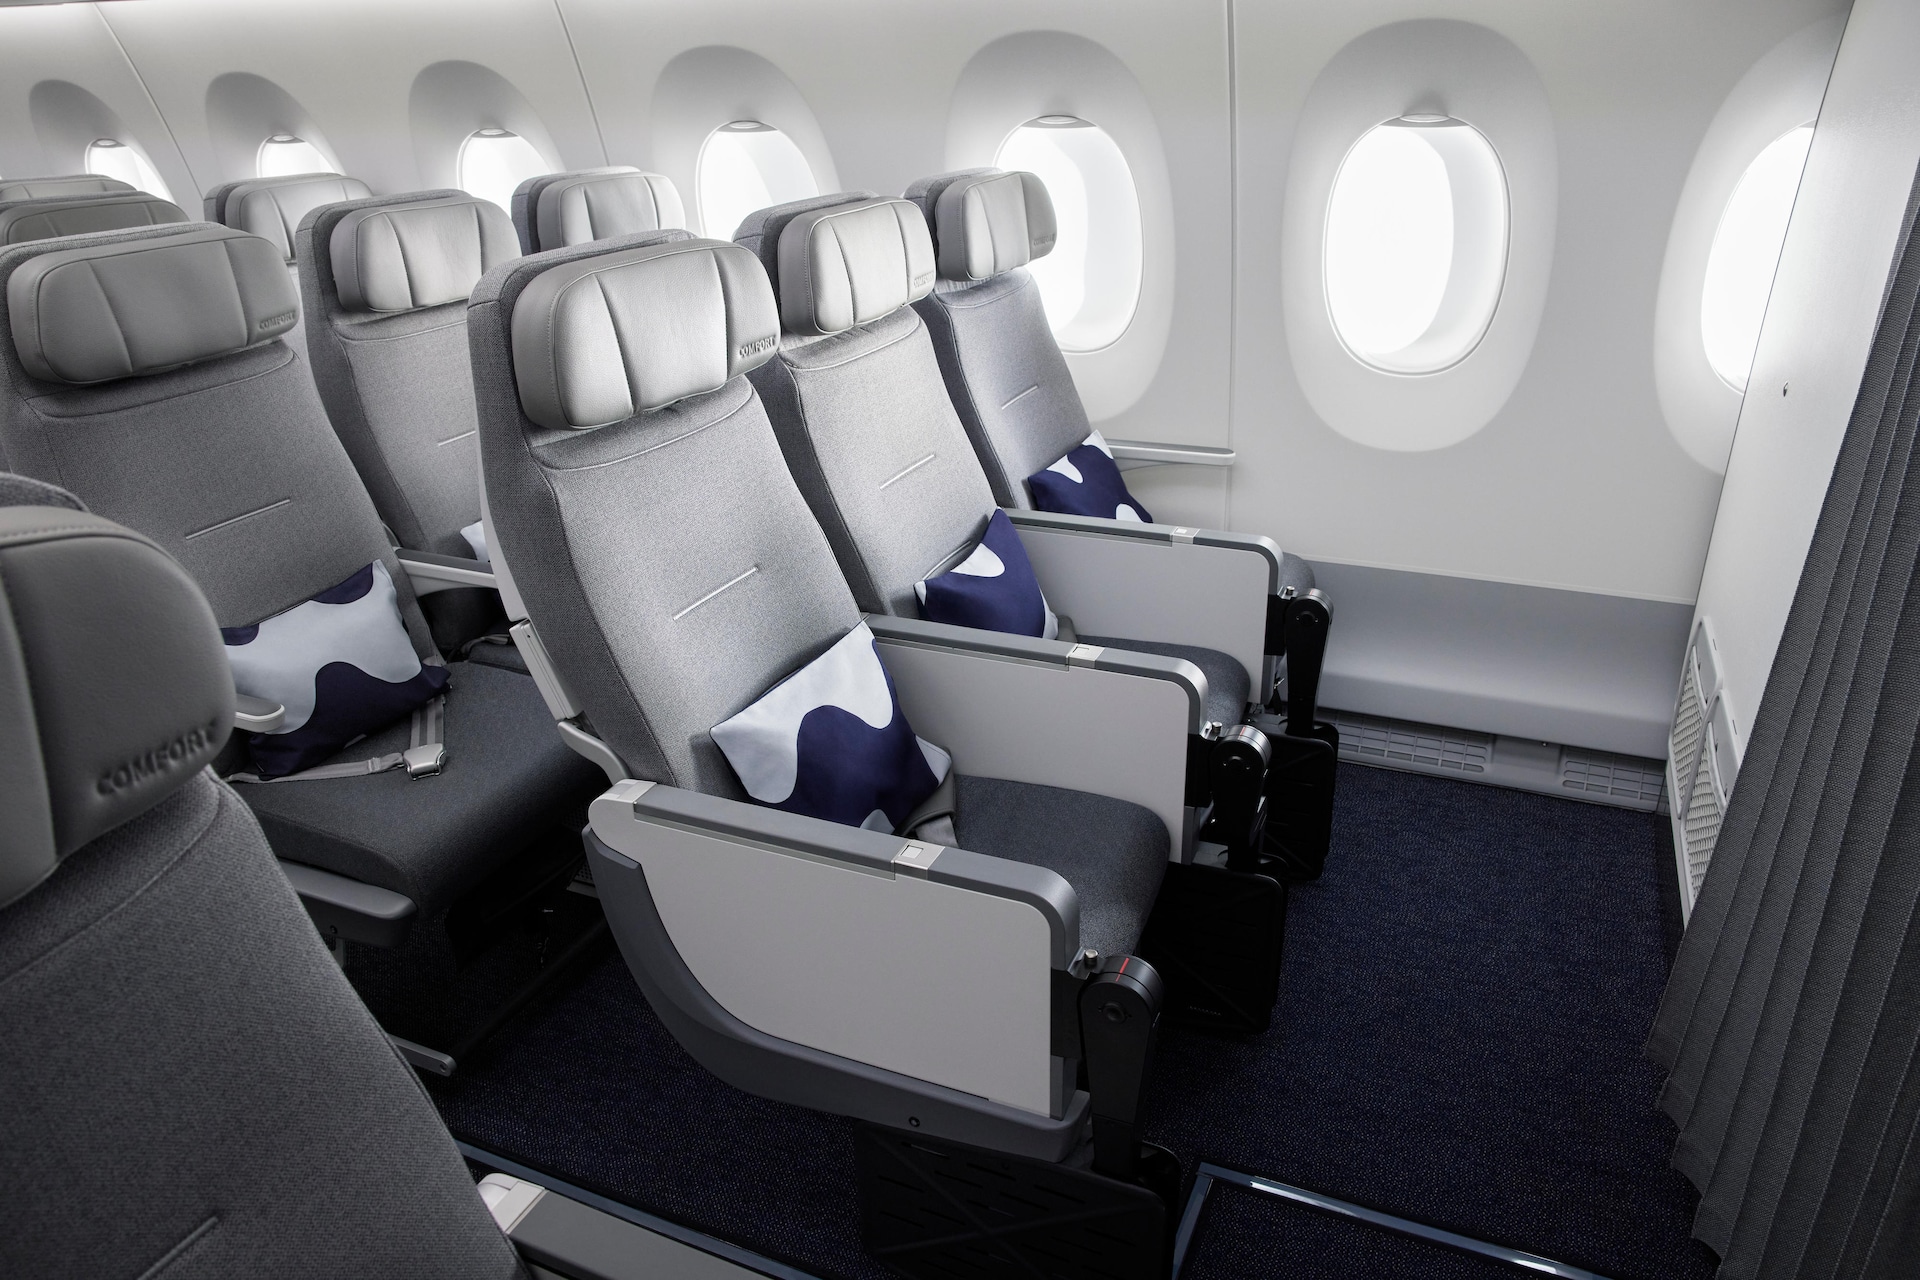 Finnair Economy, upgraded New experiences in every seat Finnair